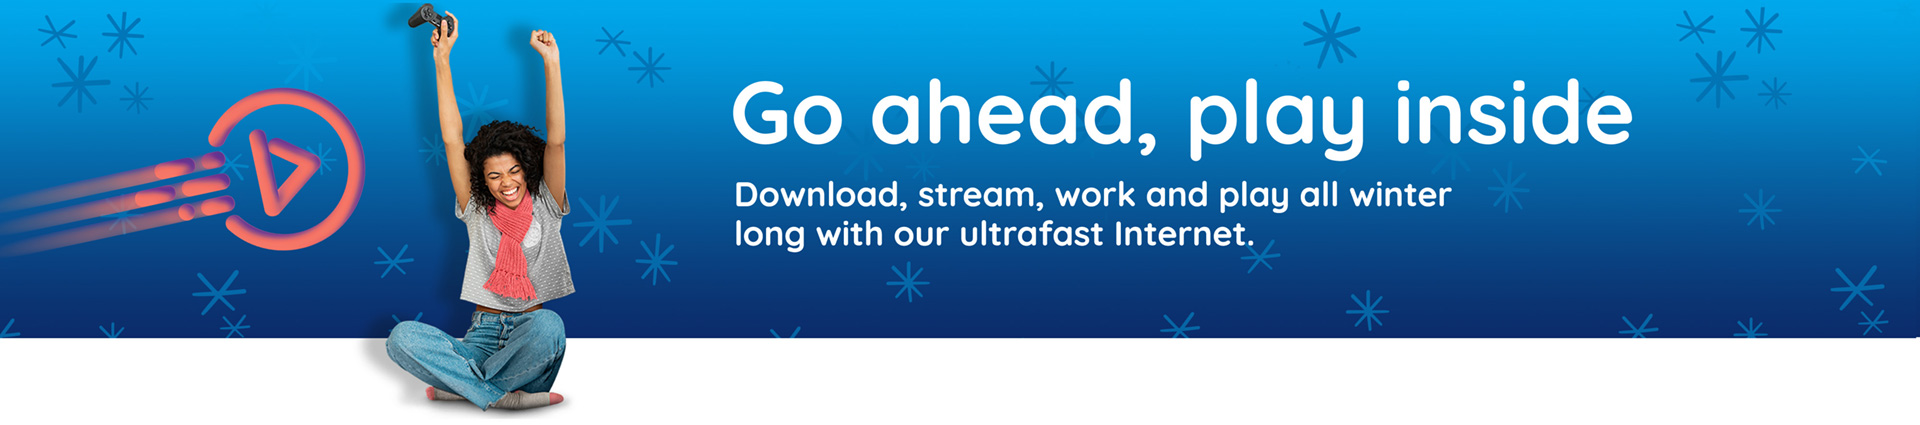 Go ahead, play inside - Download, stream, work and play all winter long with our ultrafast Internet.